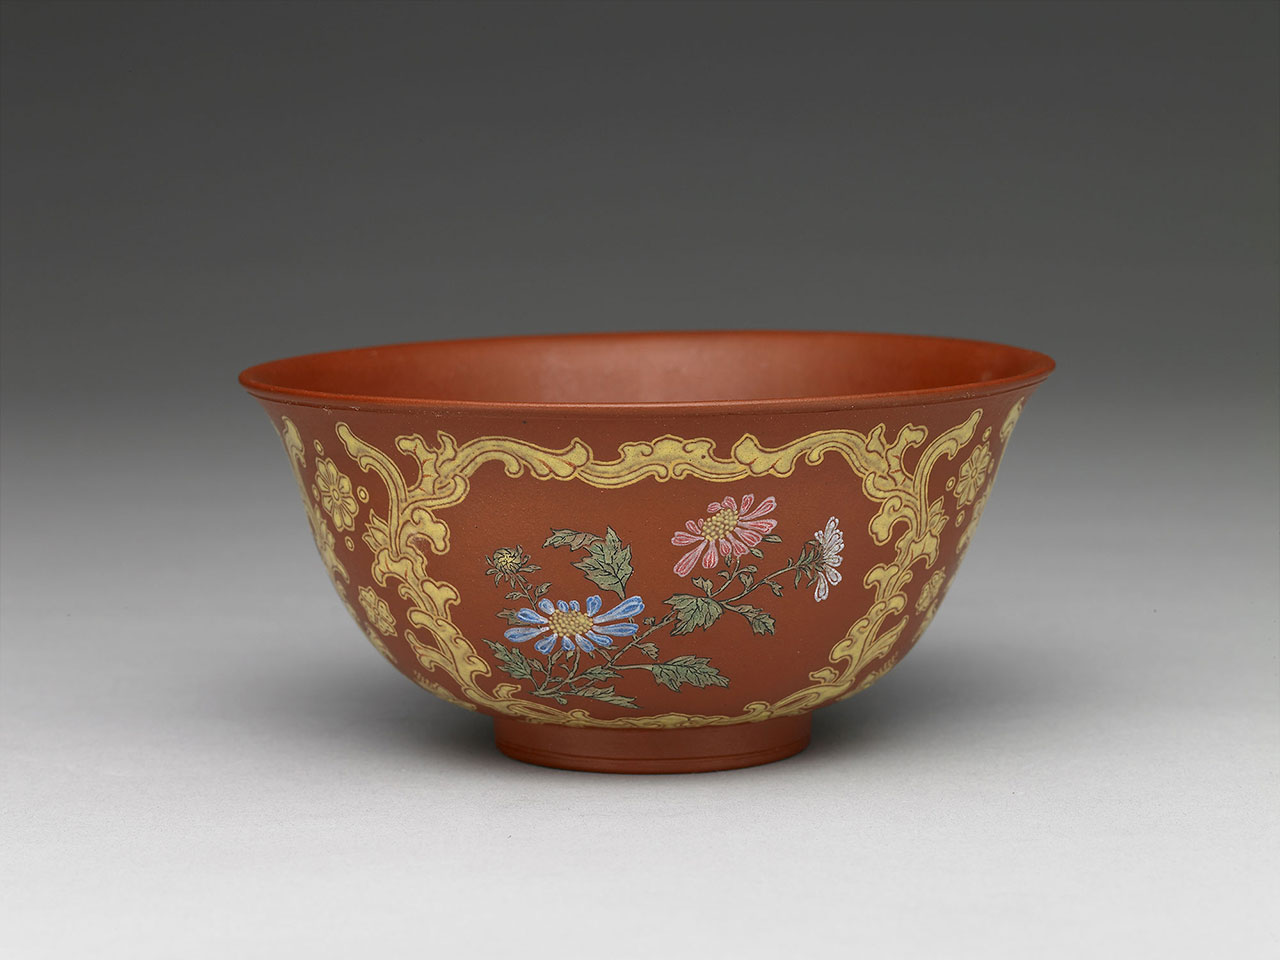 Yixing tea bowl with flowers in painted enamels